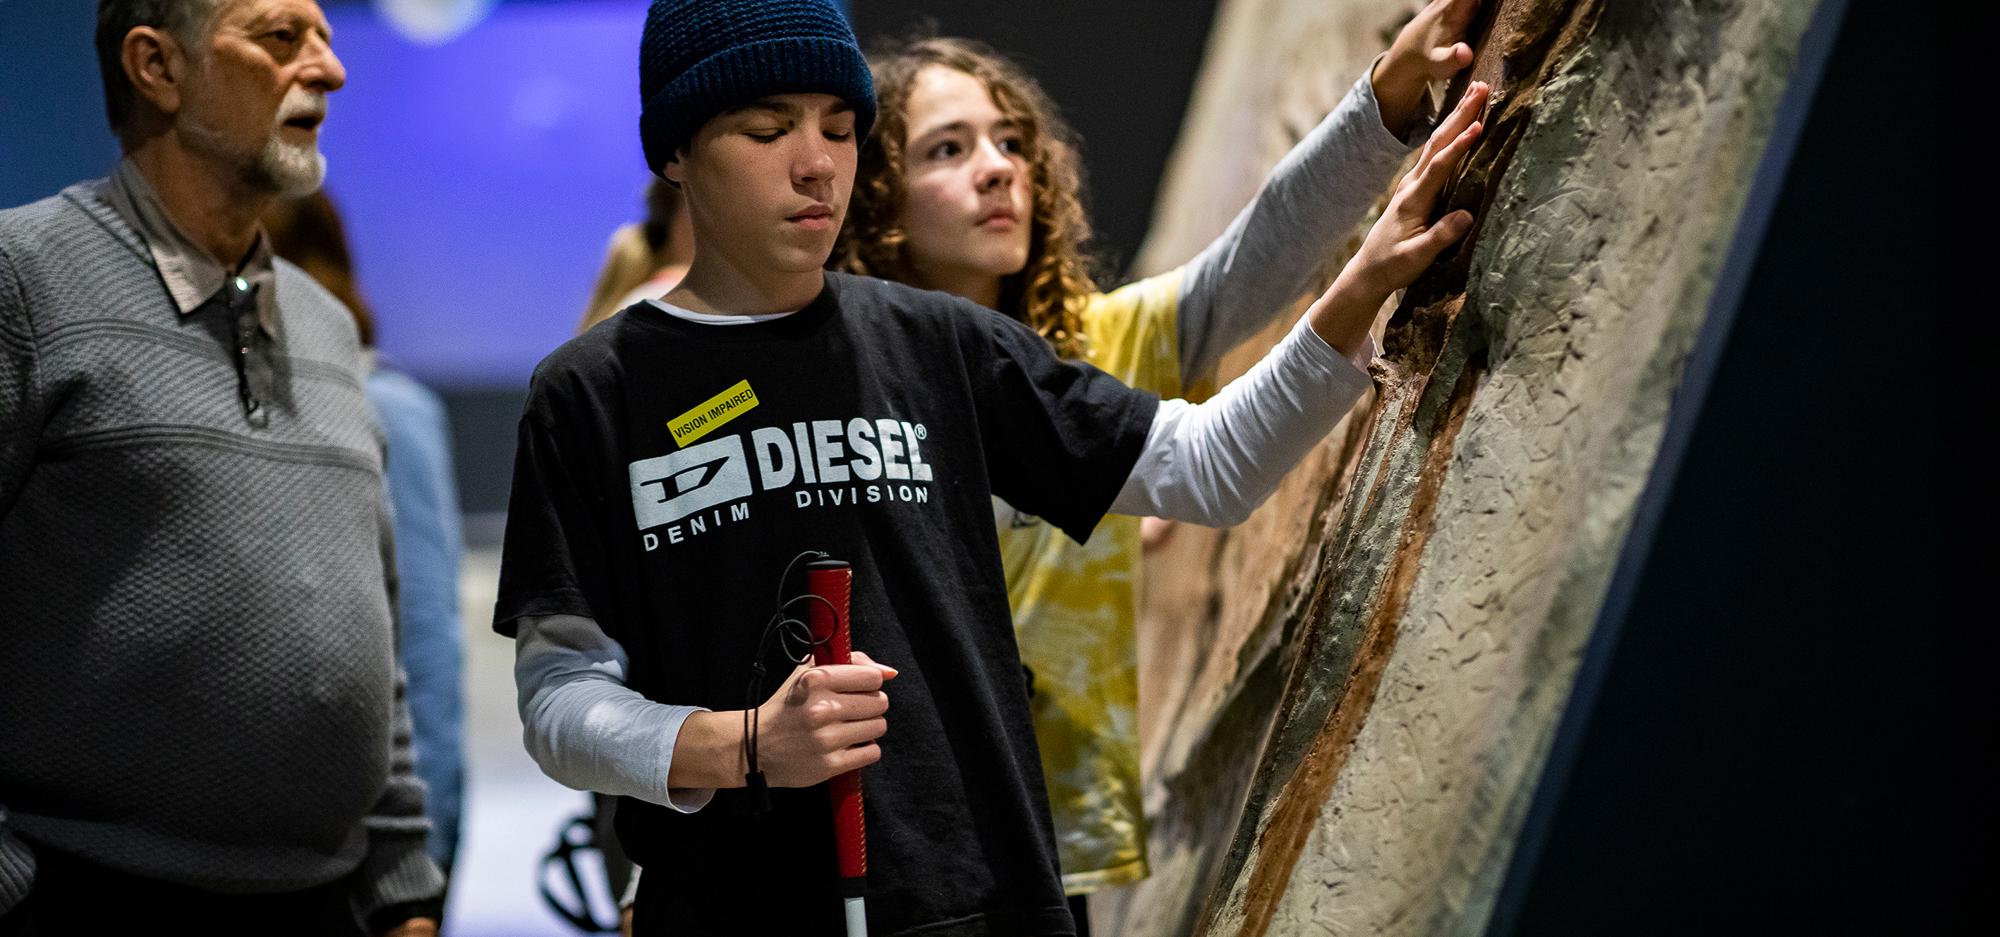 A young person wearing a blue beanie and blue t-shirt with a white Diesel logo closes their eyes as they hold a white cane in their right hand, and gently touch a textured wall with their left hand.